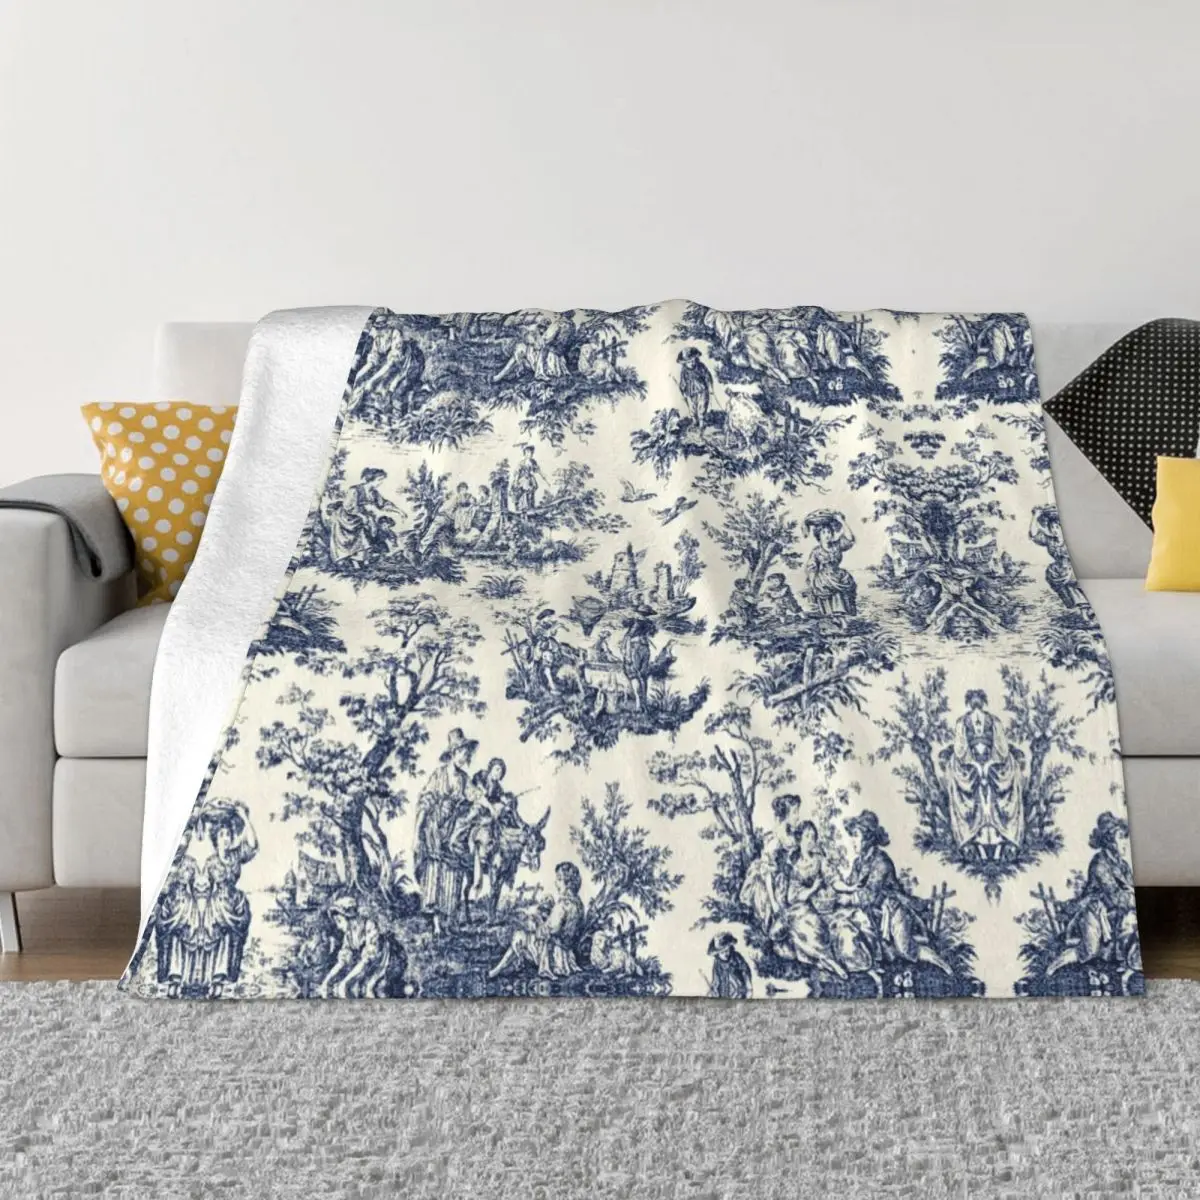 

3D Print Vintage Toile De Jouy Blankets Breathable Soft Flannel Summer Navy Blue And White Throw Blanket for Sofa Car Bedroom